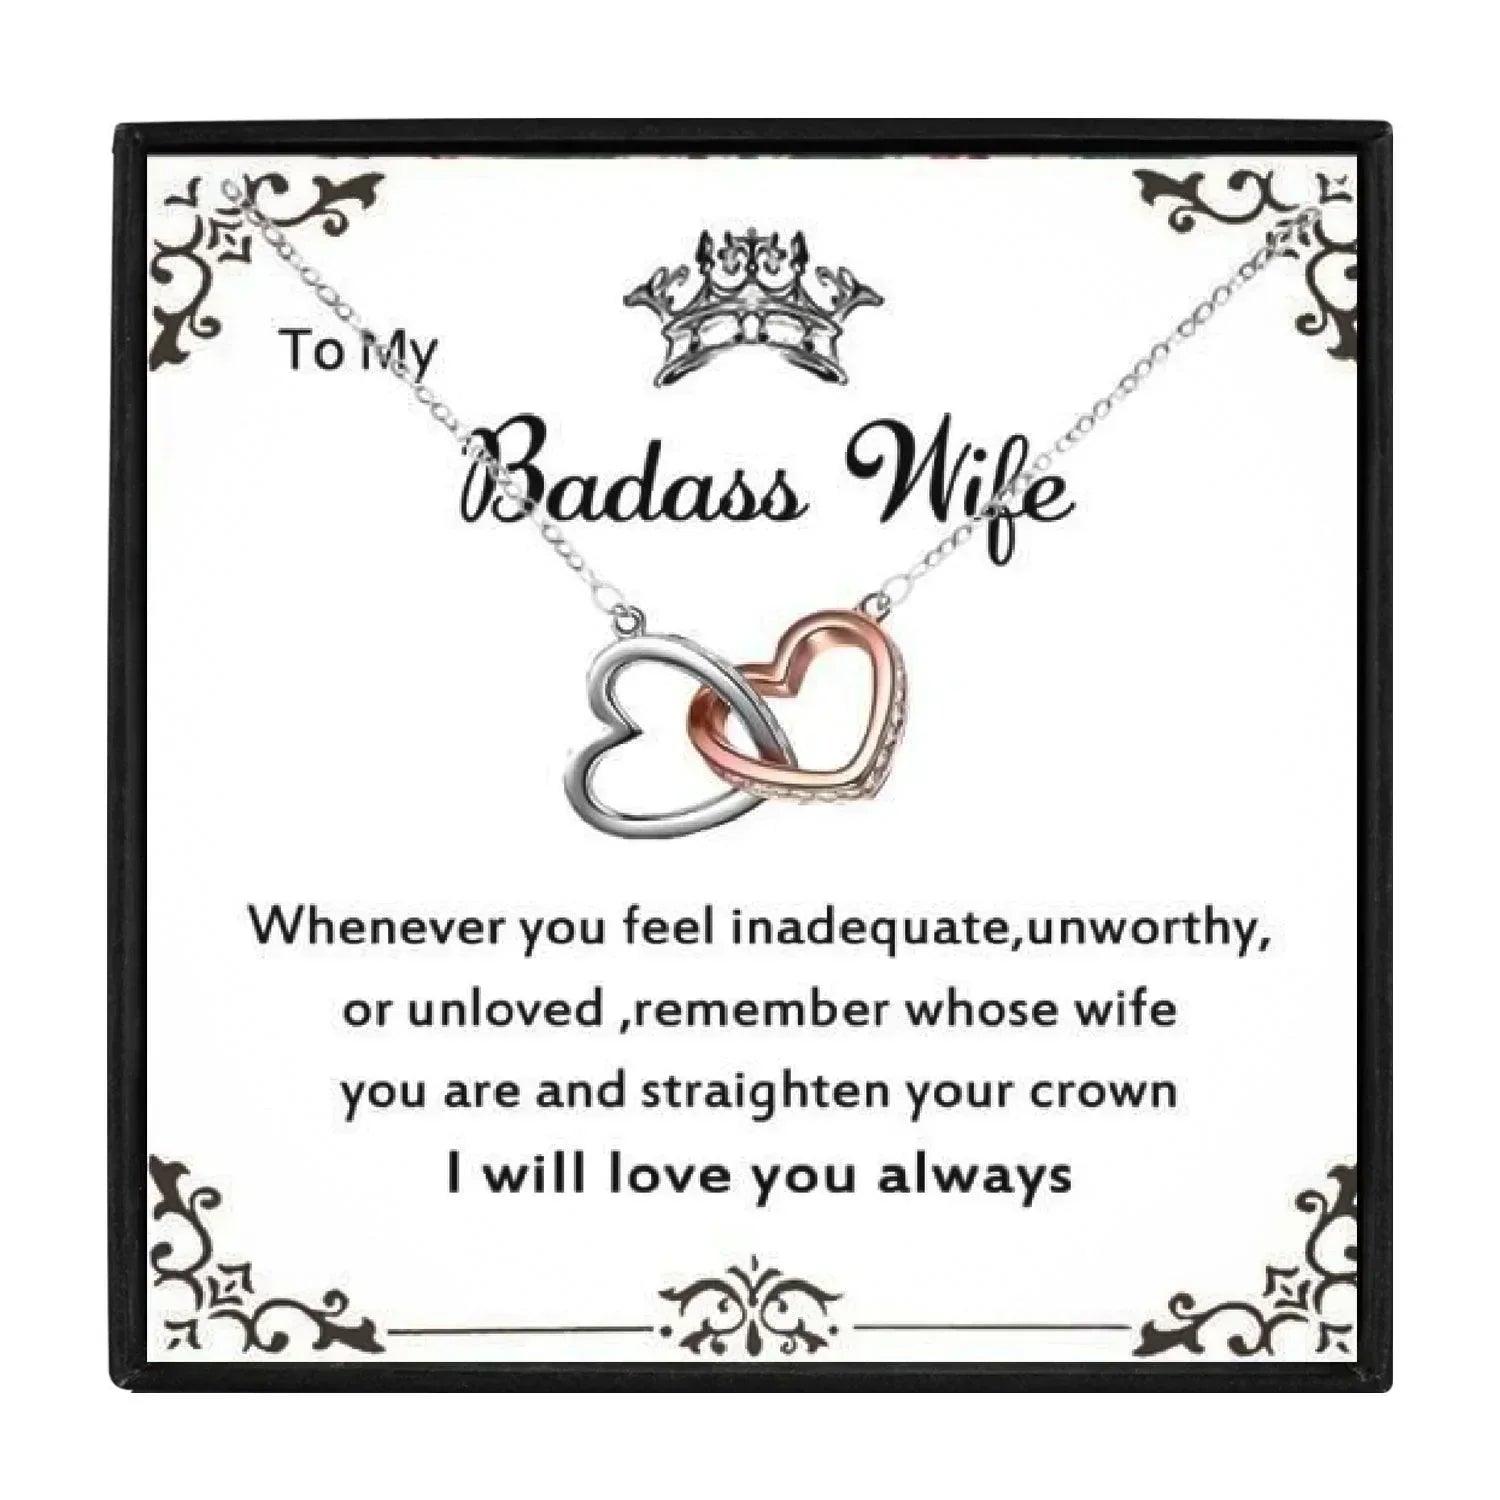 To My Badass Wife Double Heart Necklace Gift Set for Christmas 2023 | To My Badass Wife Double Heart Necklace Gift Set - undefined | Badass Wife Double Heart Necklace, wife gift, wife gift ideas | From Hunny Life | hunnylife.com